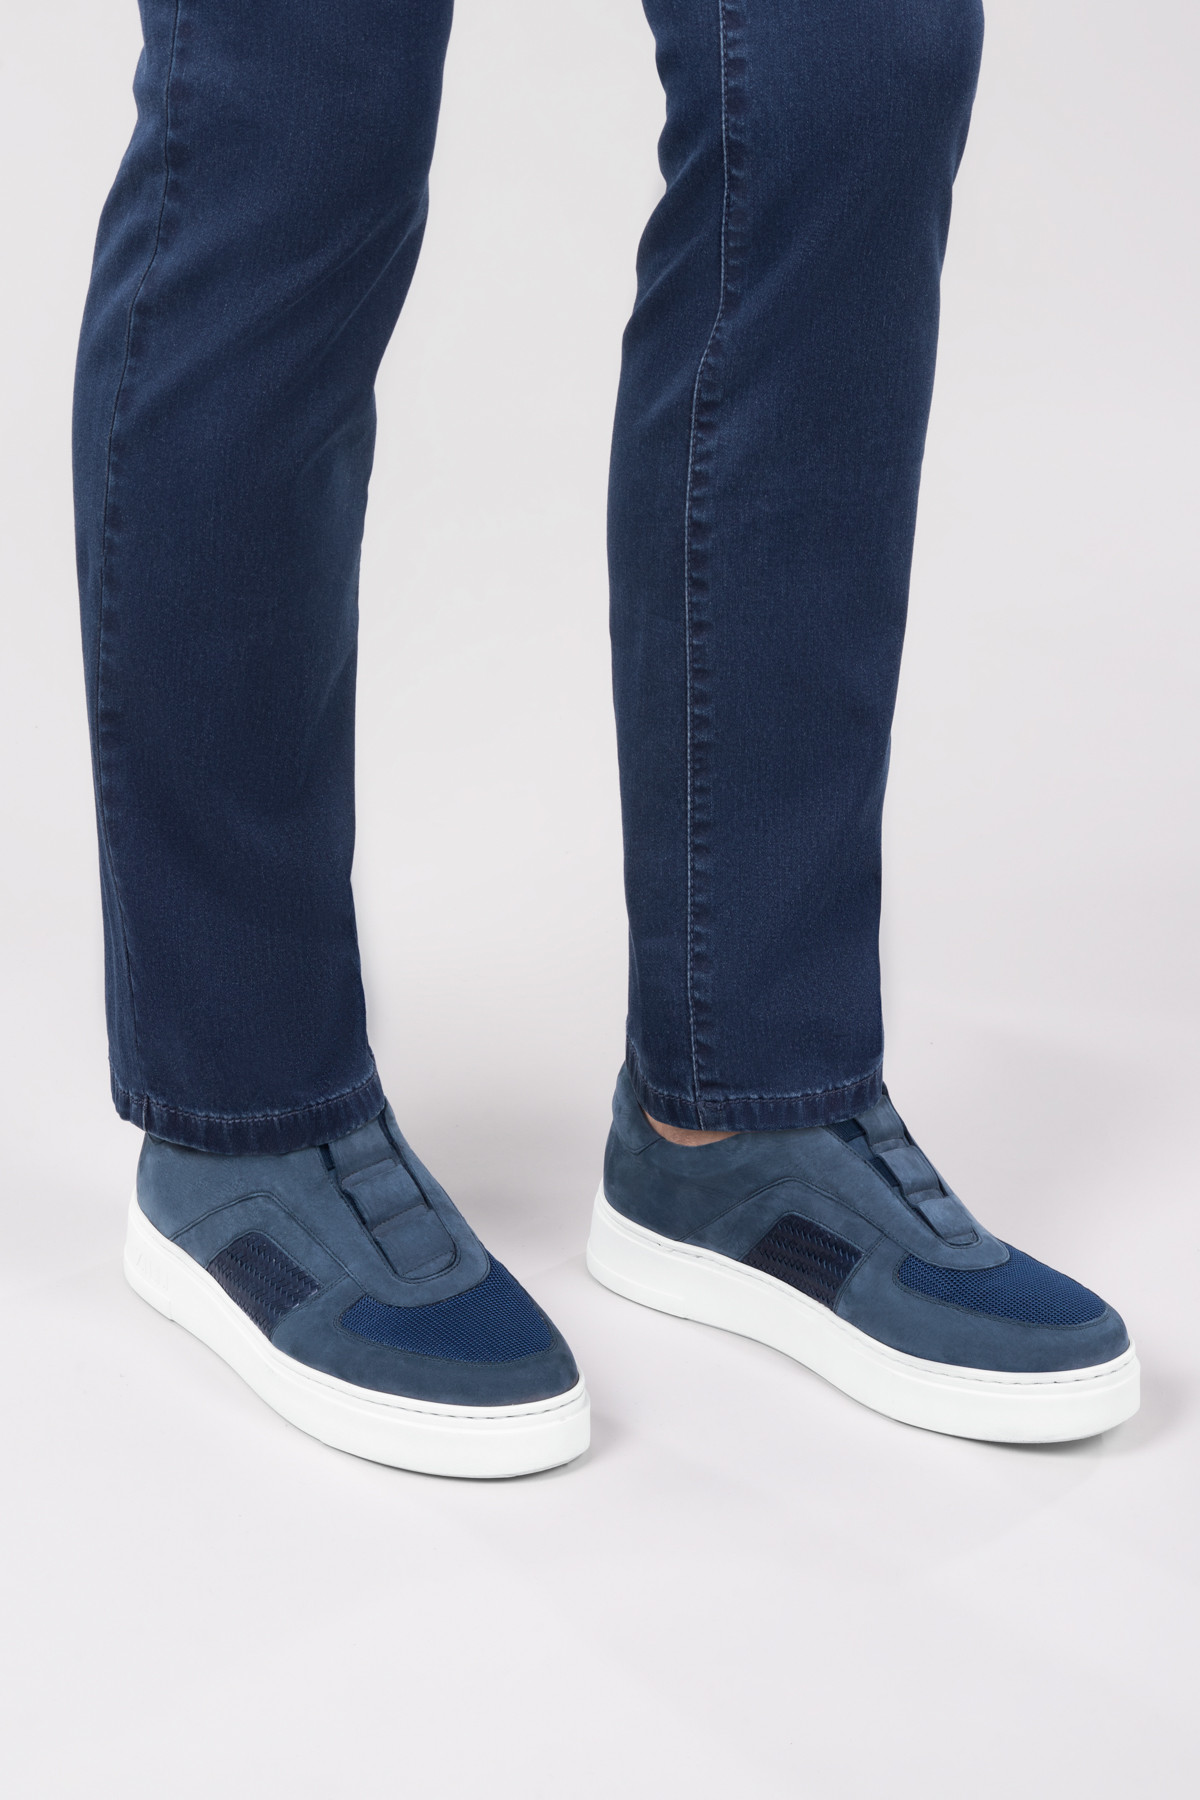 Navy-blue sneakers in suede calfskin, weaved calfskin and technical fabric